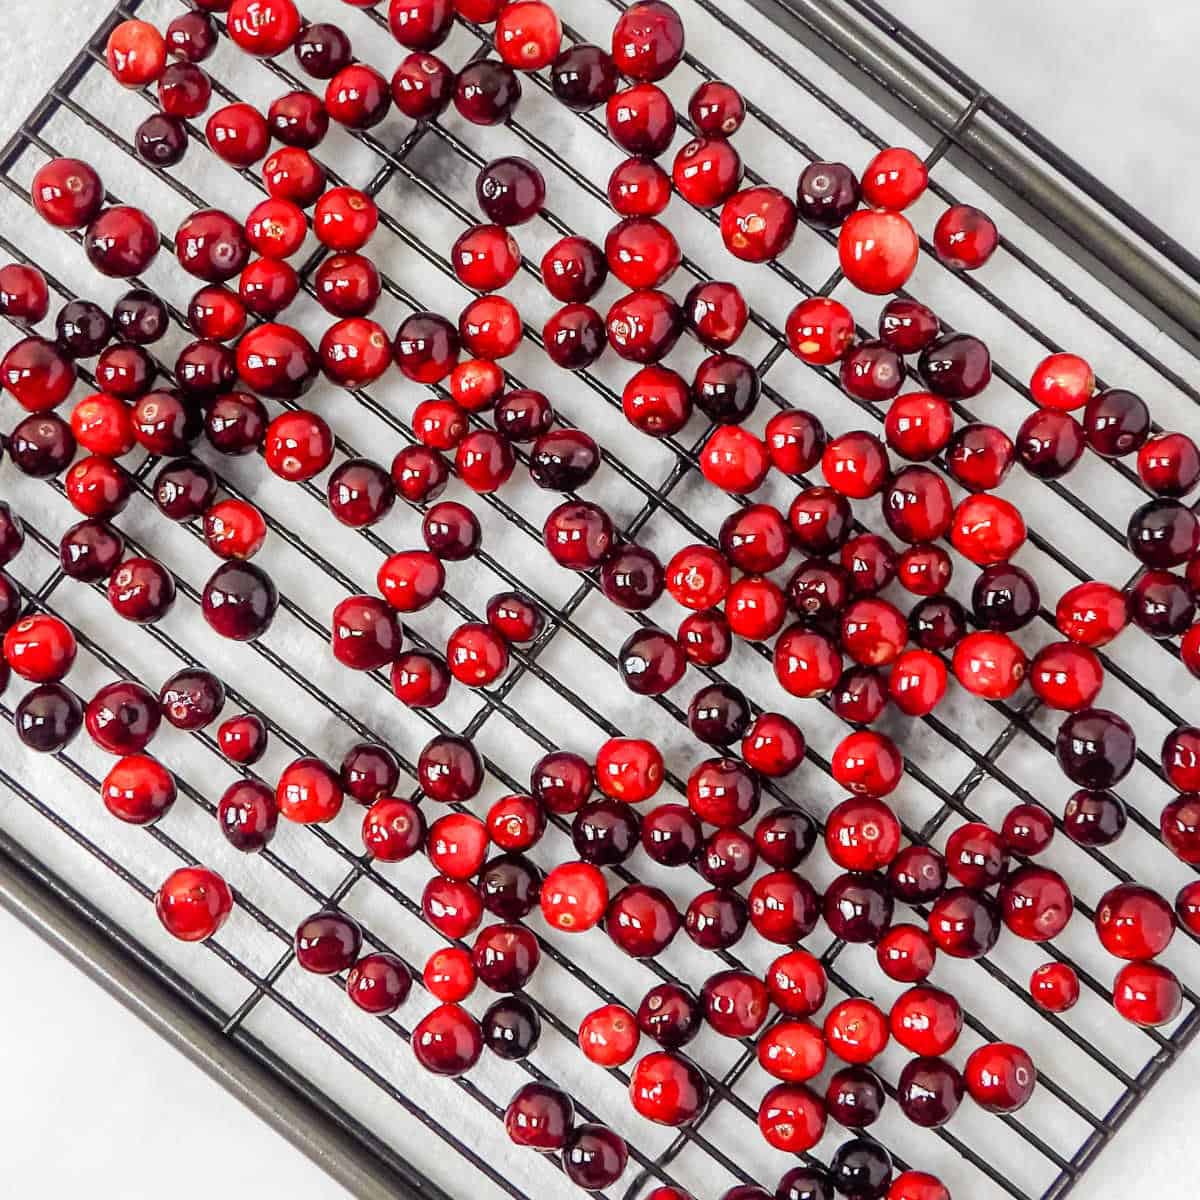 Simple syrup coated cranberries drying on a black metal rack.